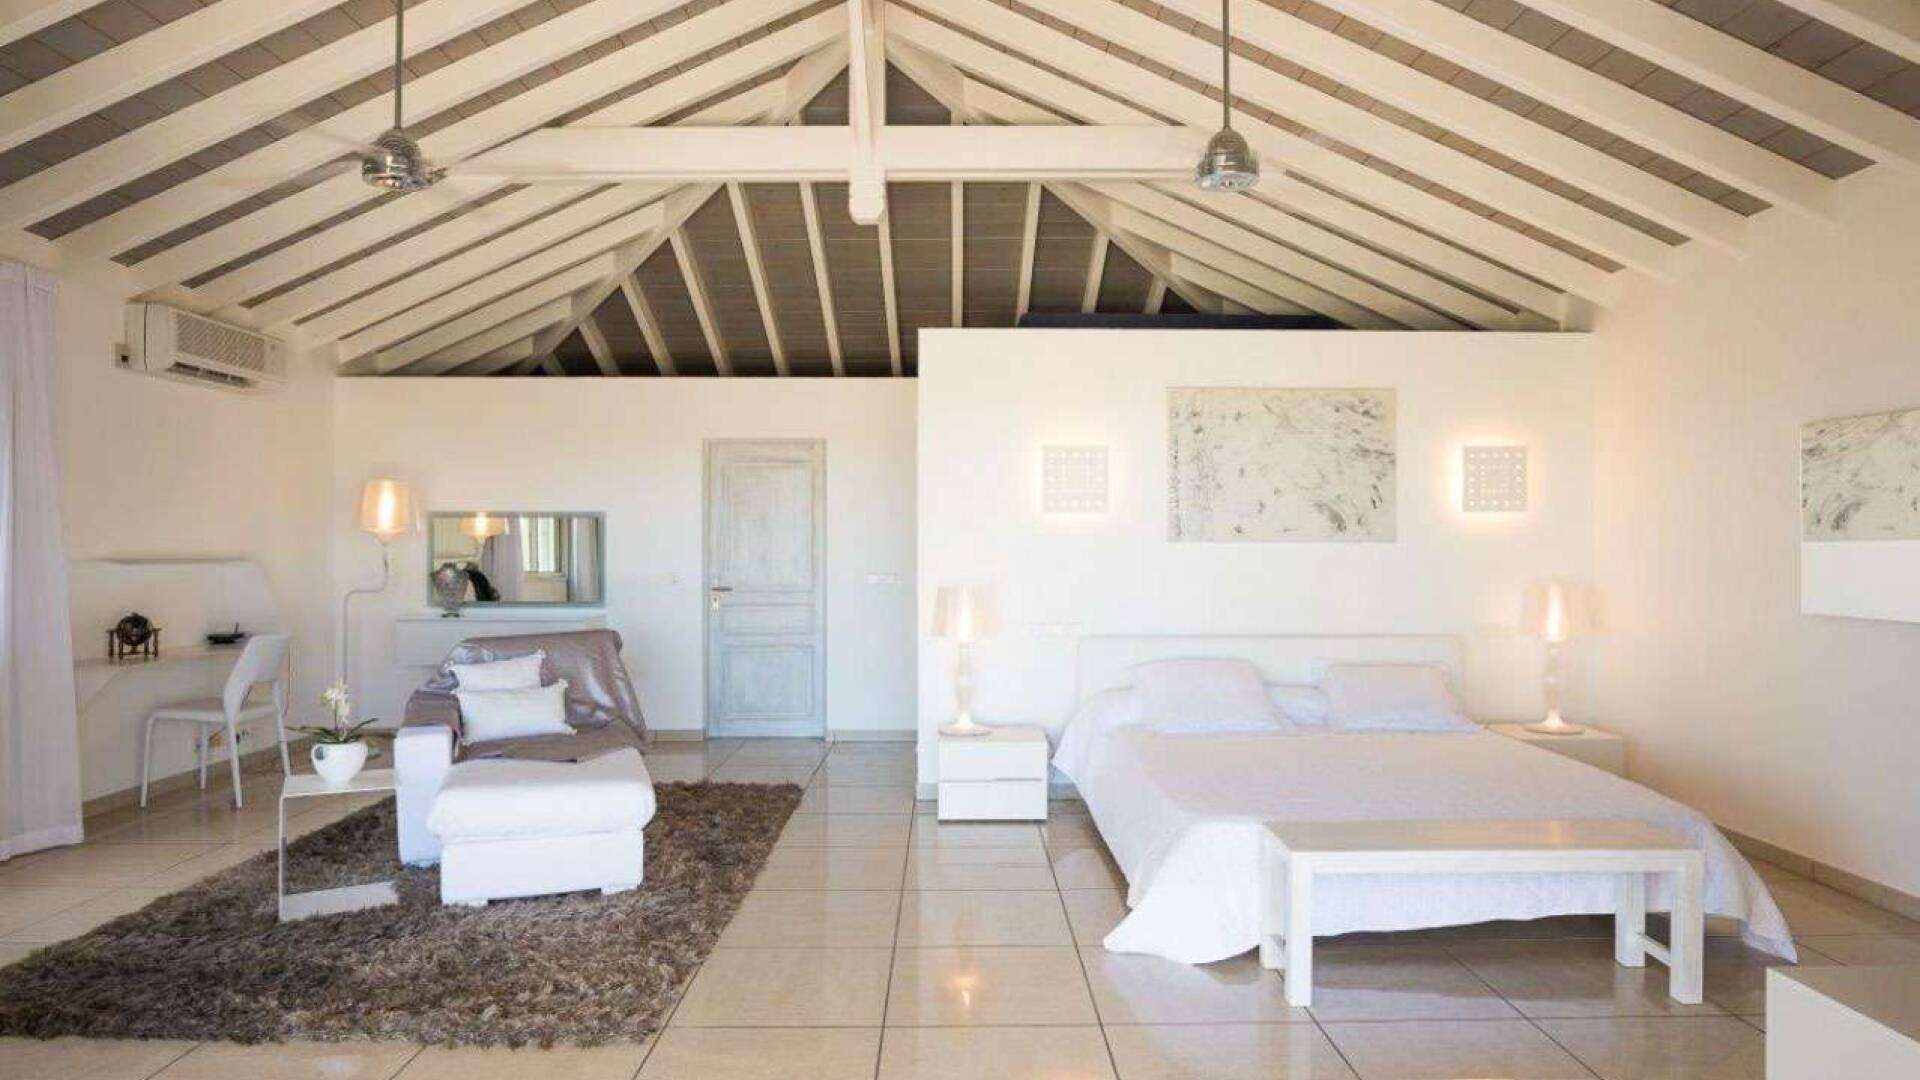 Bedroom at WV PRE, Gustavia, St. Barthelemy